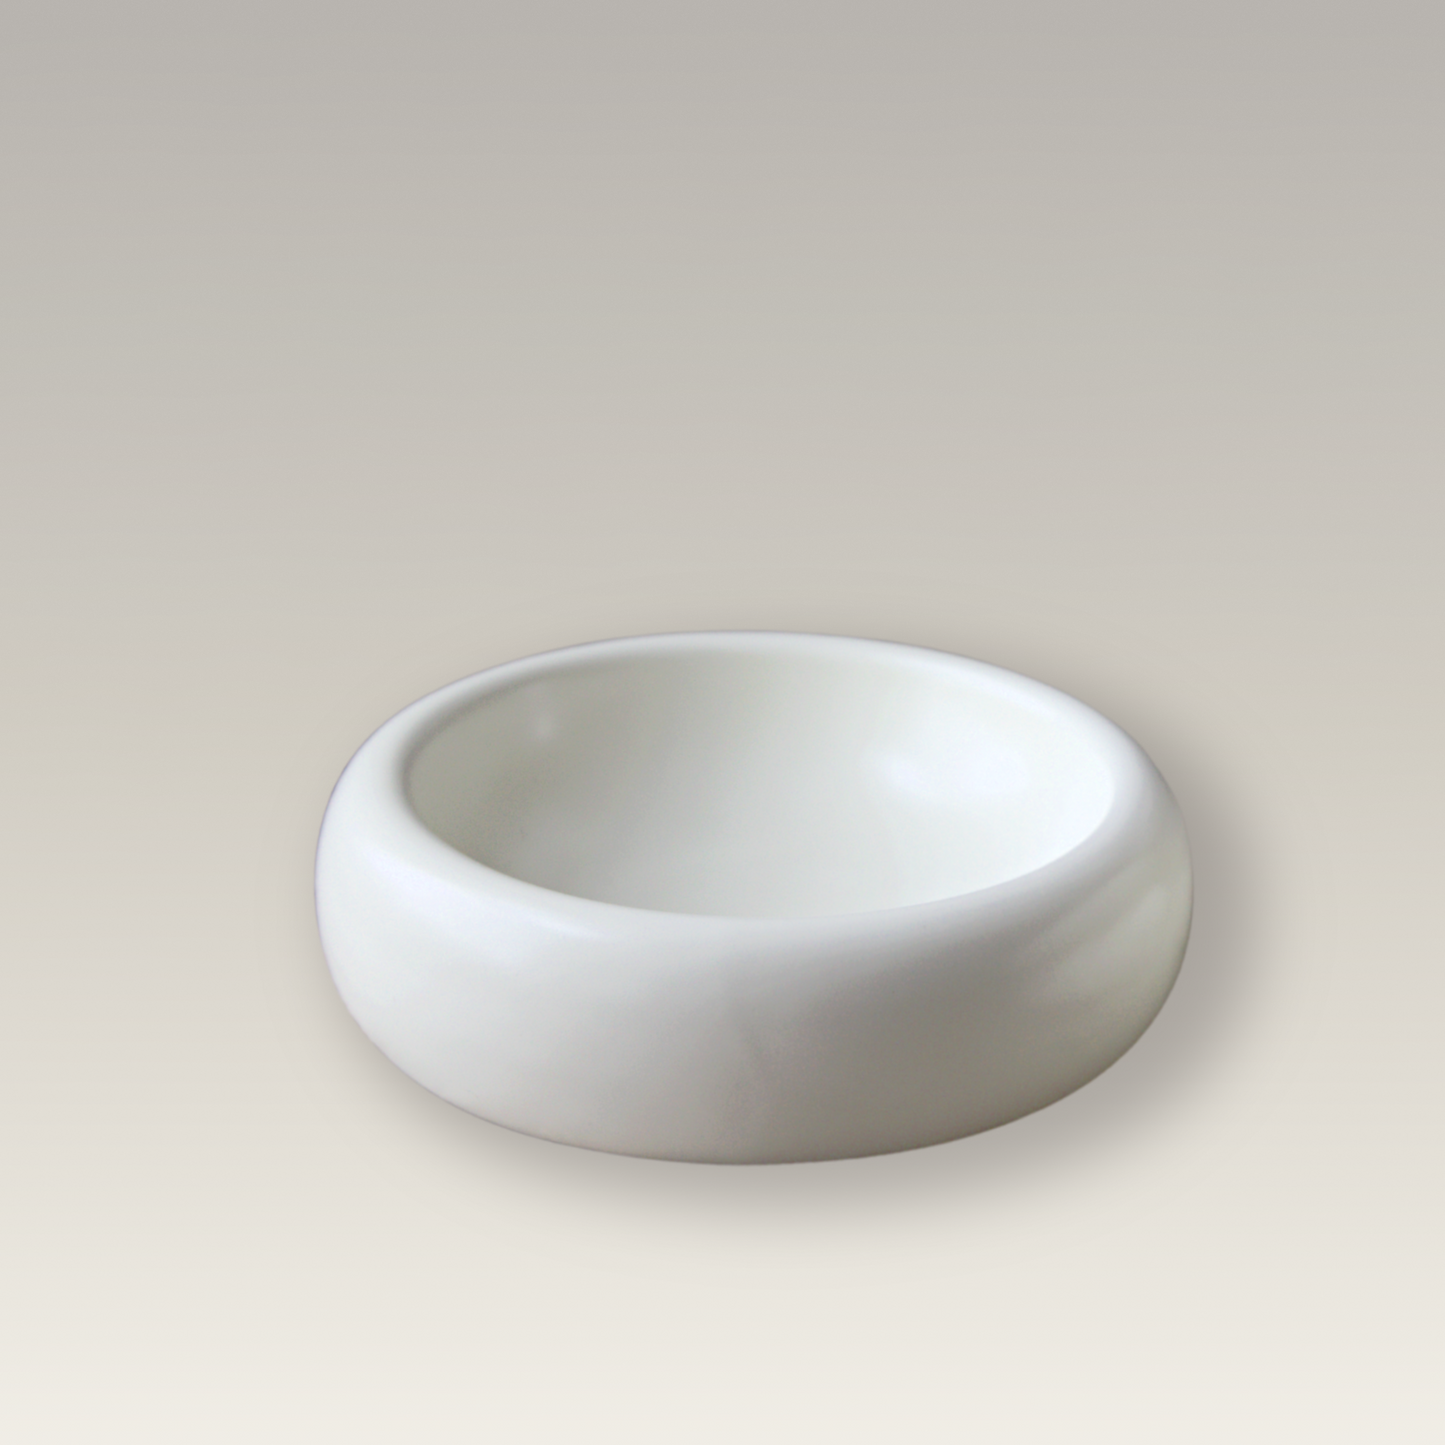 product image of modern cat food bowl on beige background with wide and shallow design to prevent whisker fatigue